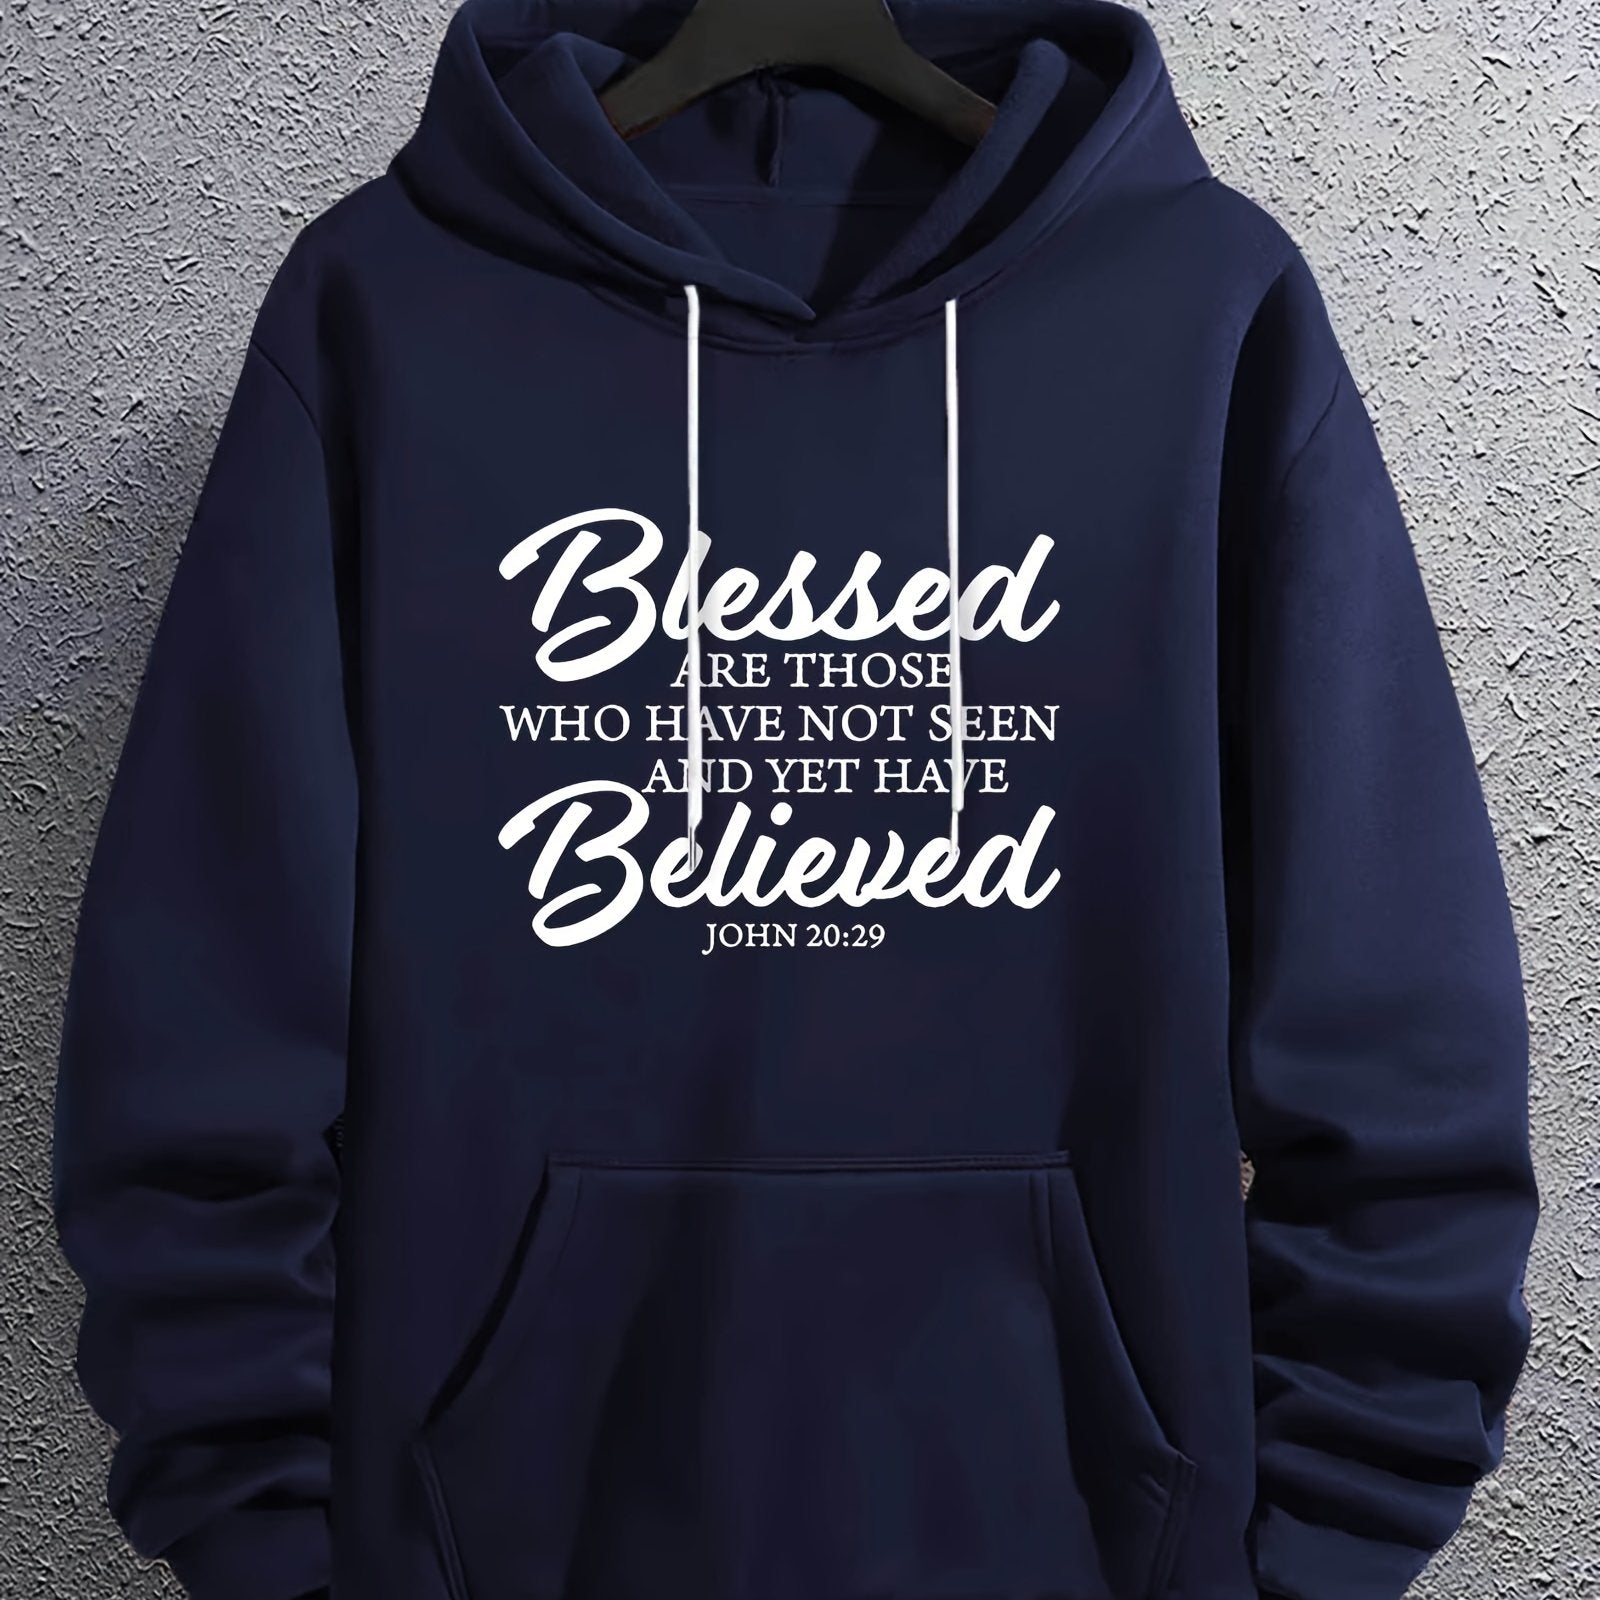 John 20:29 Blessed Are Those Who Have Not Seen & Yet Have Believed Unisex Christian Pullover Hooded Sweatshirt claimedbygoddesigns